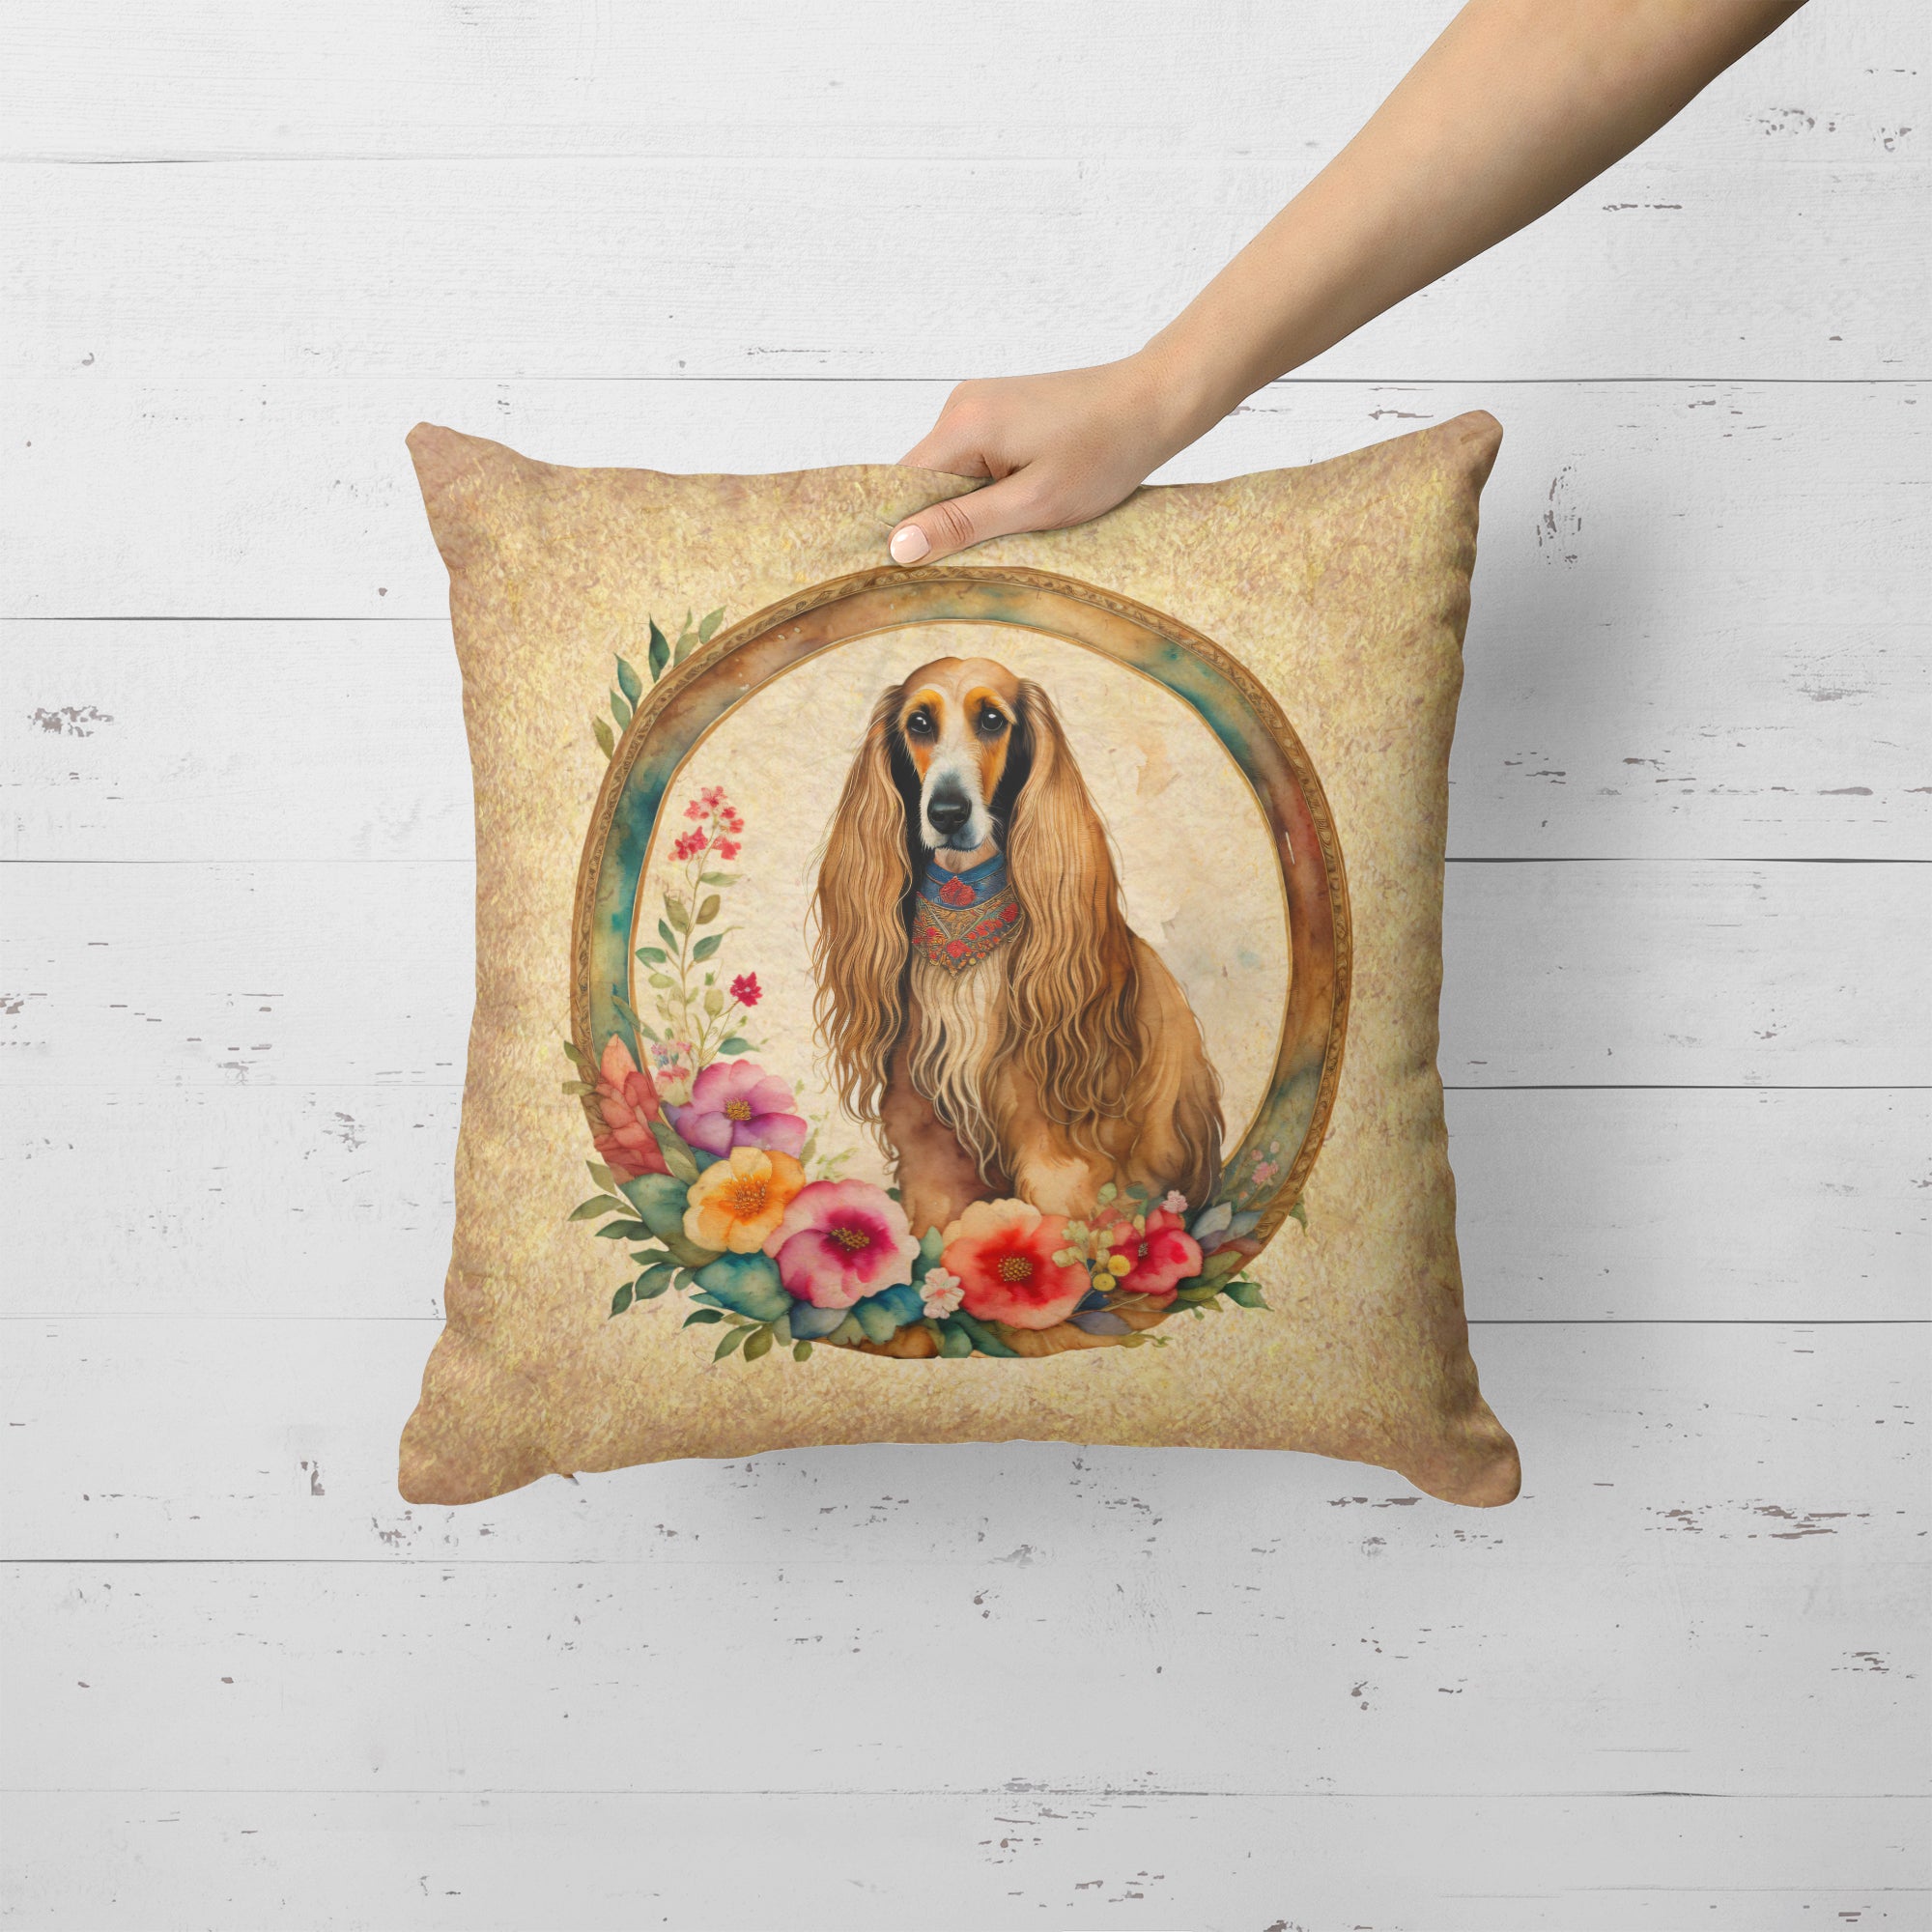 Buy this Afghan Hound and Flowers Fabric Decorative Pillow